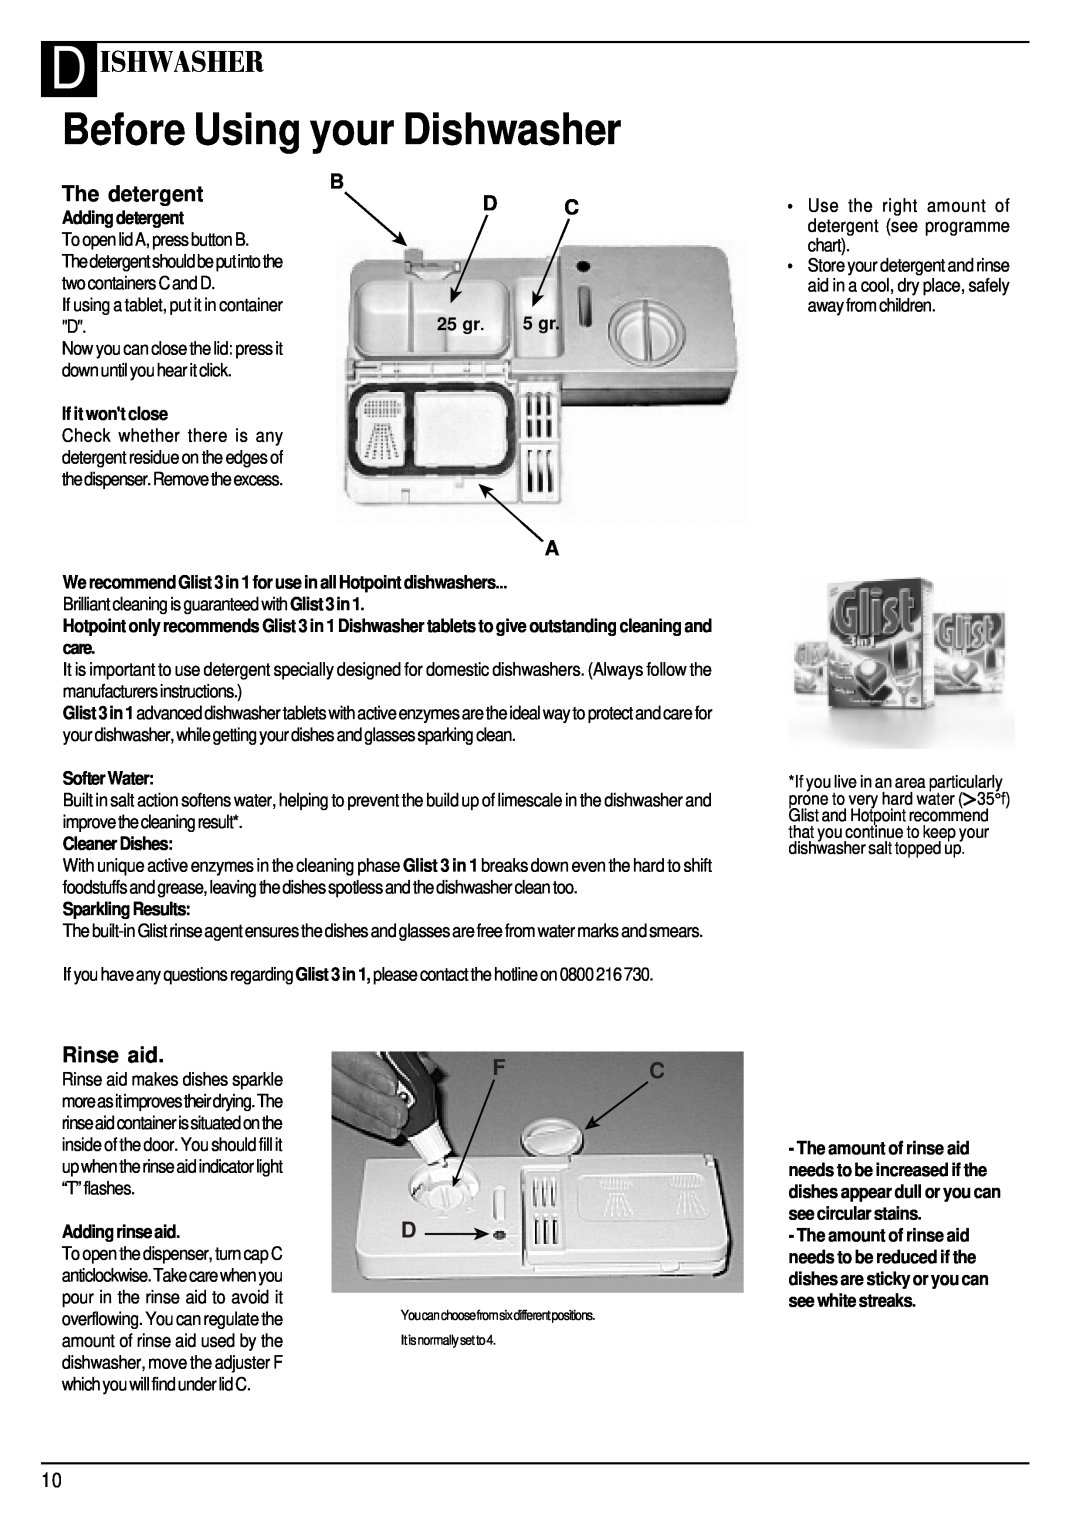 Hotpoint BFI68 manual Before Using your Dishwasher, D Ishwasher, The detergent, Rinse aid, Fc D, Adding detergent, 25 gr 